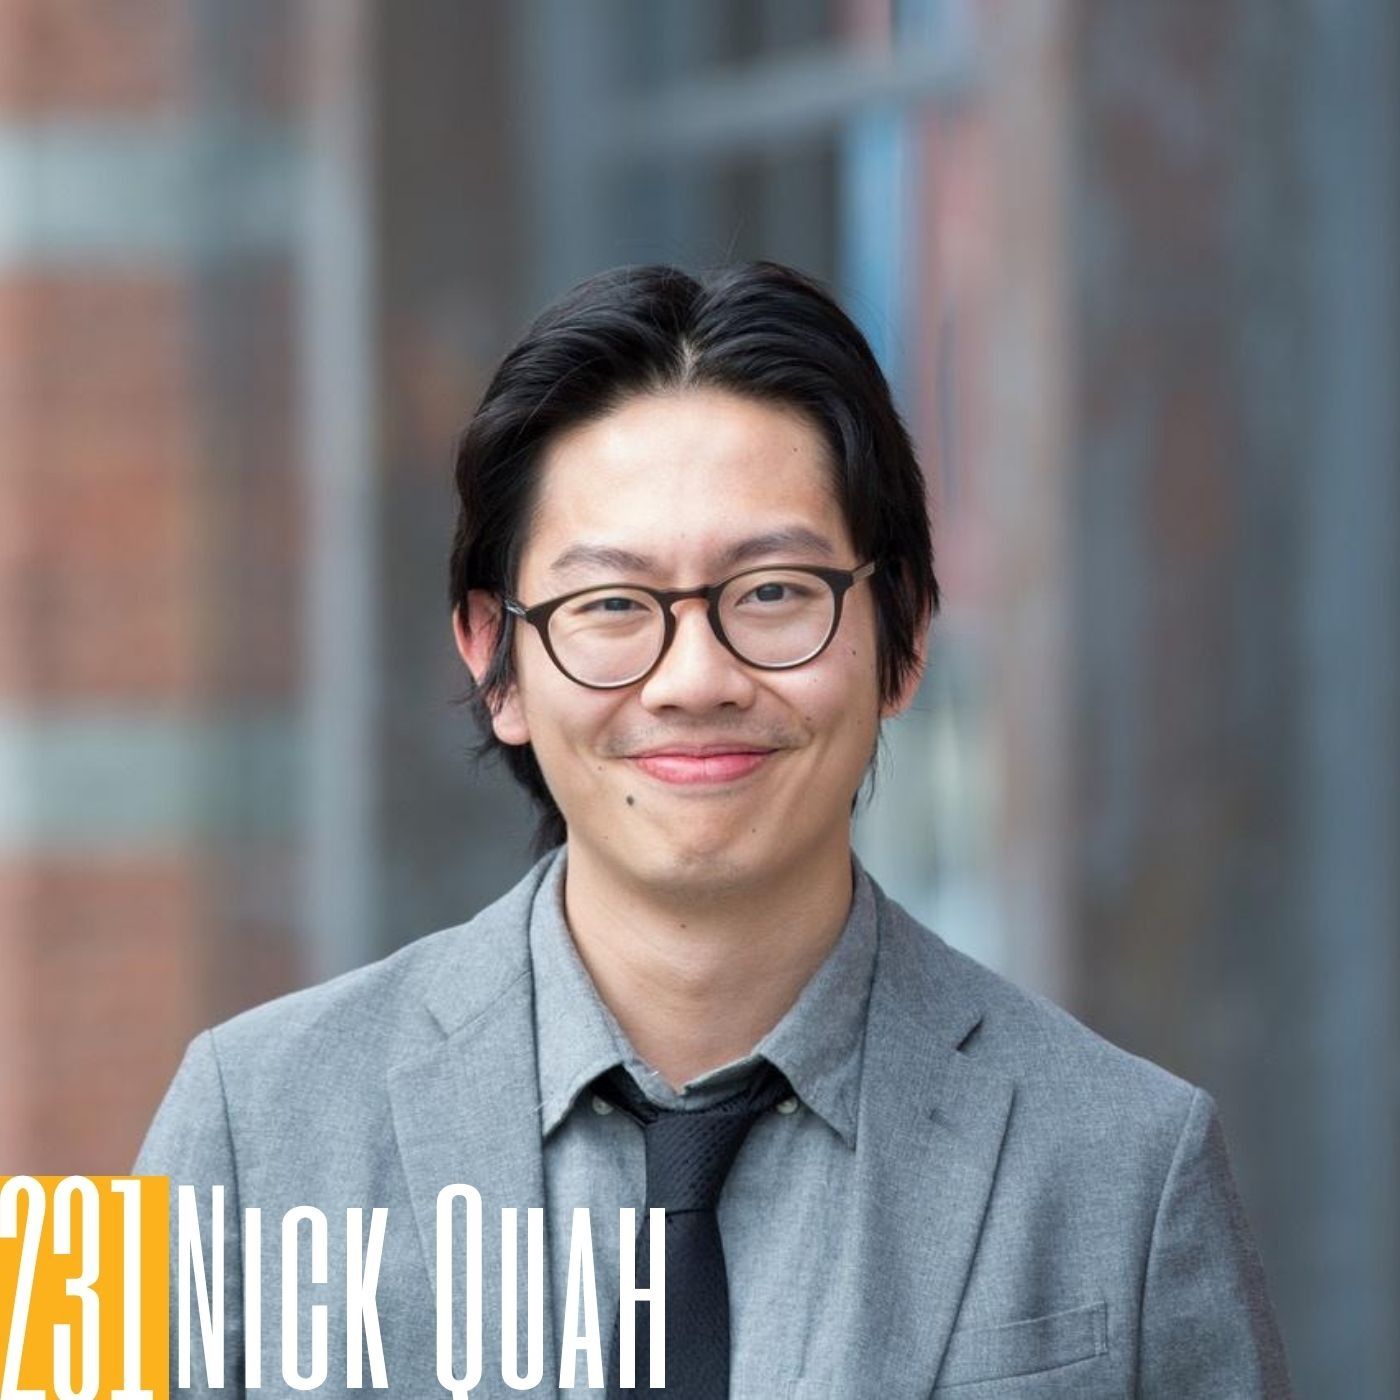 231 Nick Quah - Servant of Pod: More Than the Sum of His Work